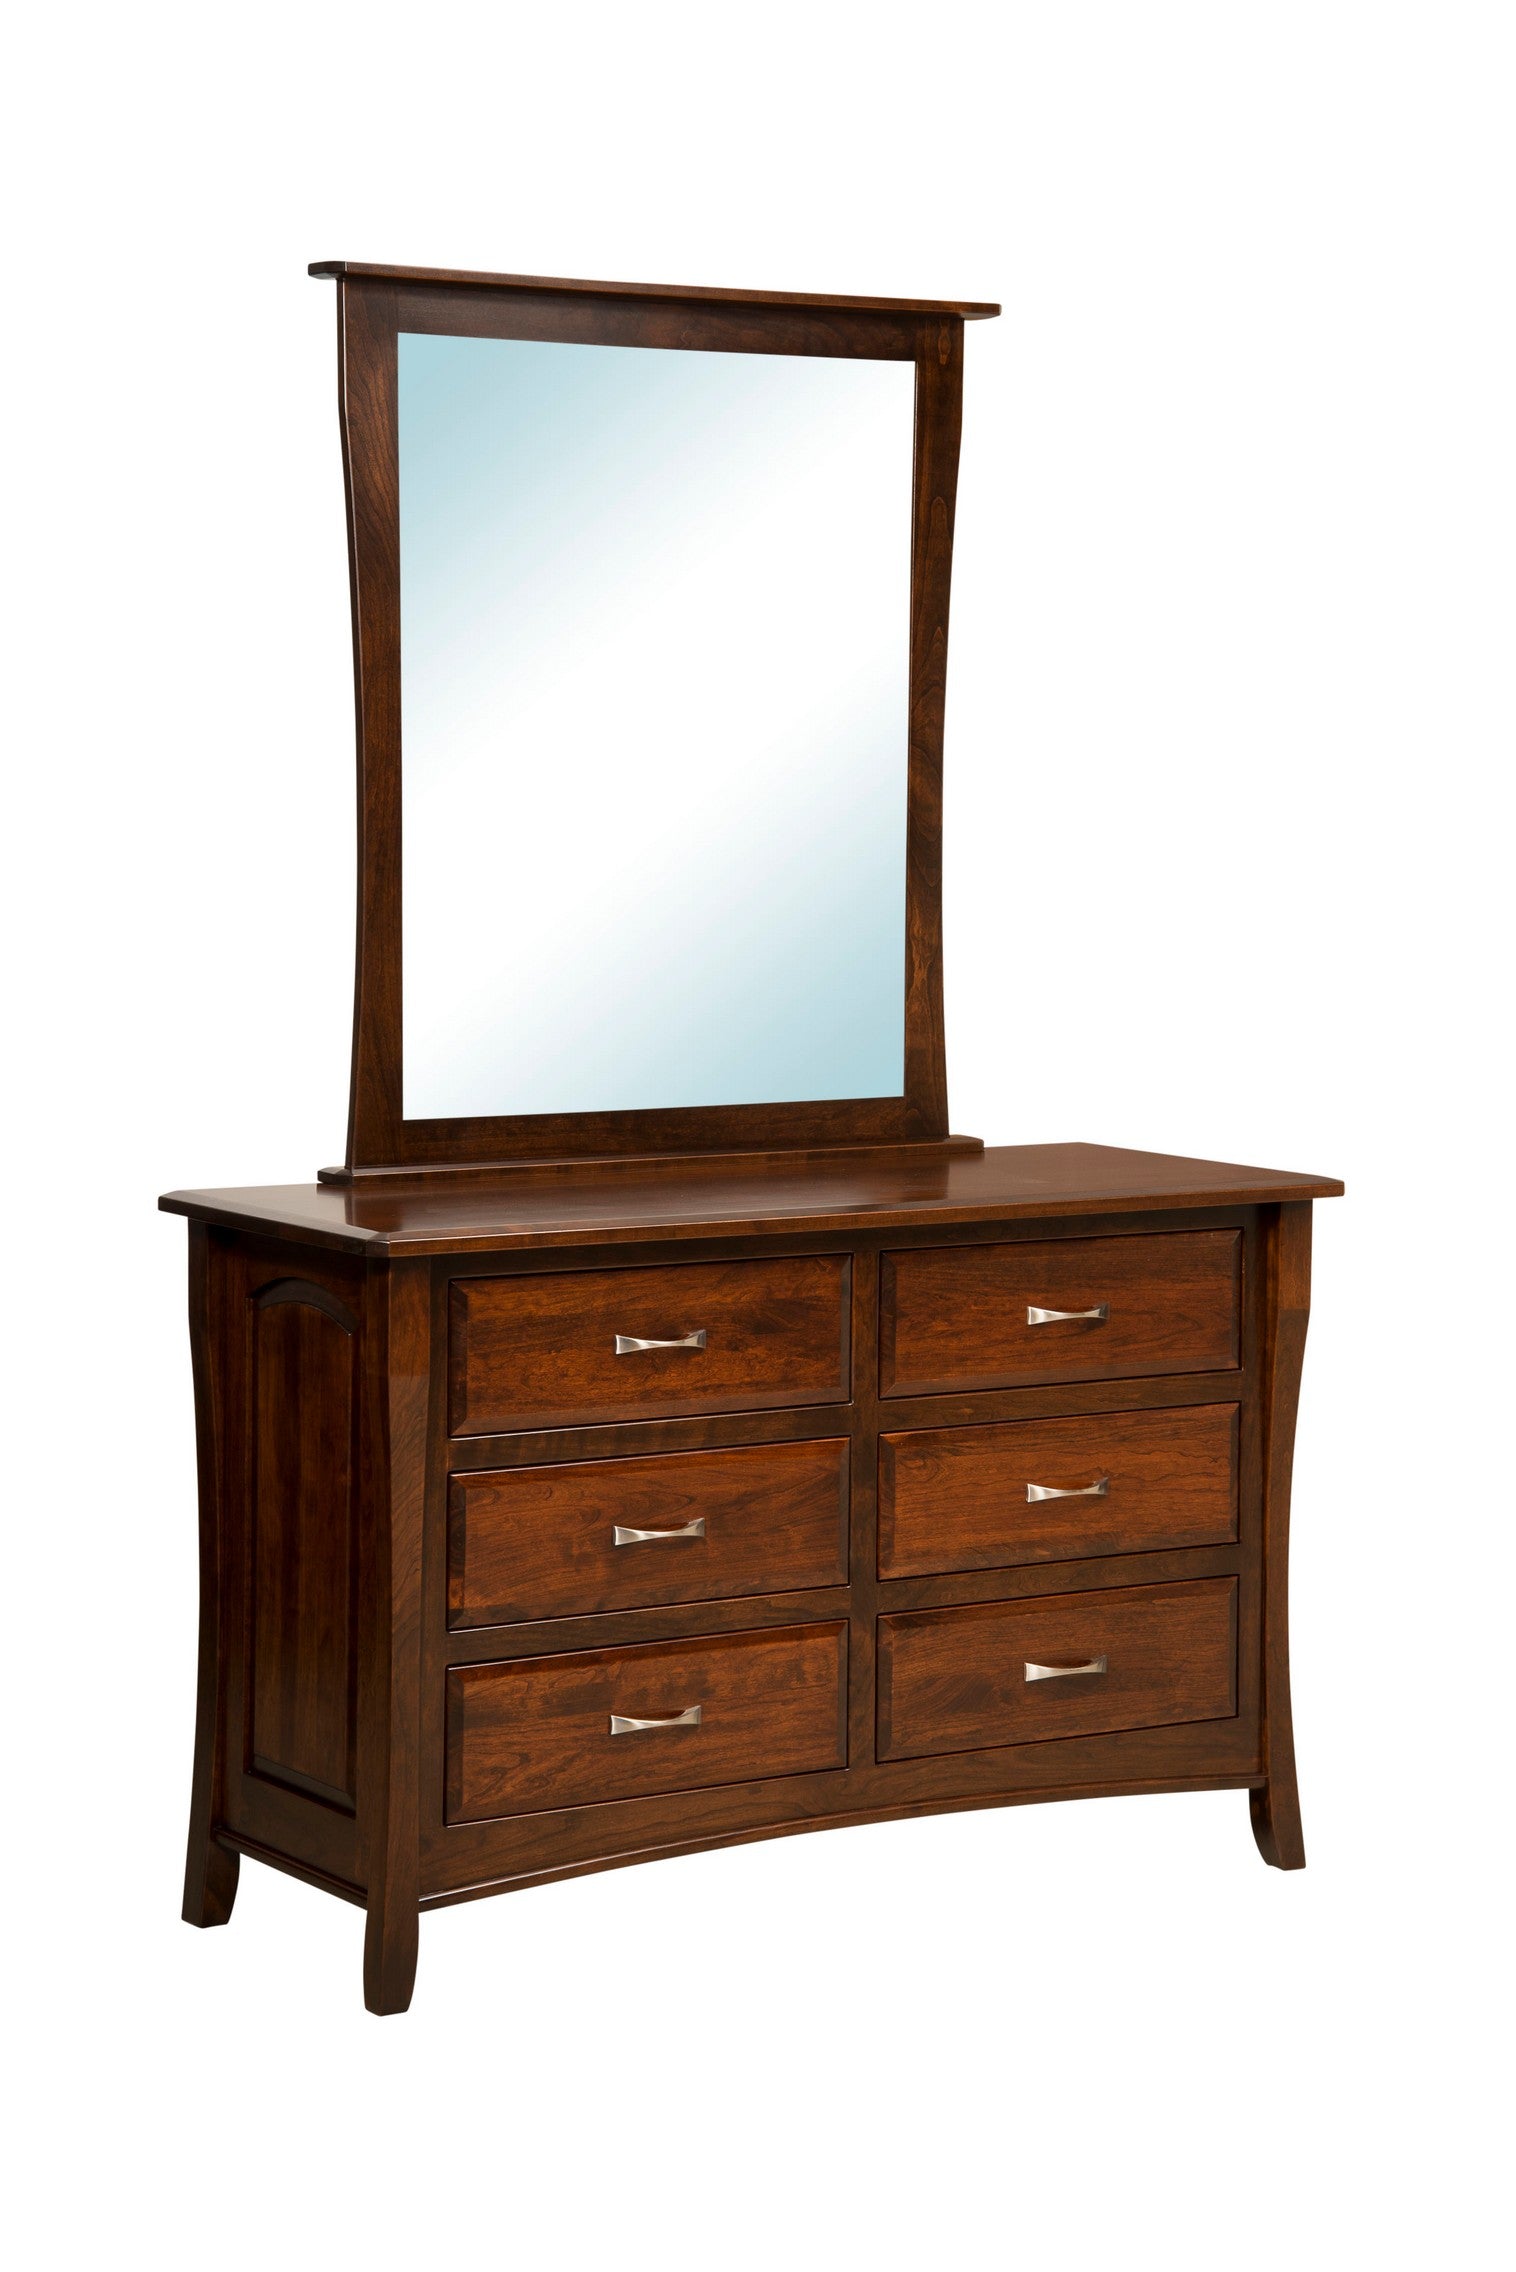 berkley six drawer dresser in sap cherry wood with rich tobacco stain and mirror